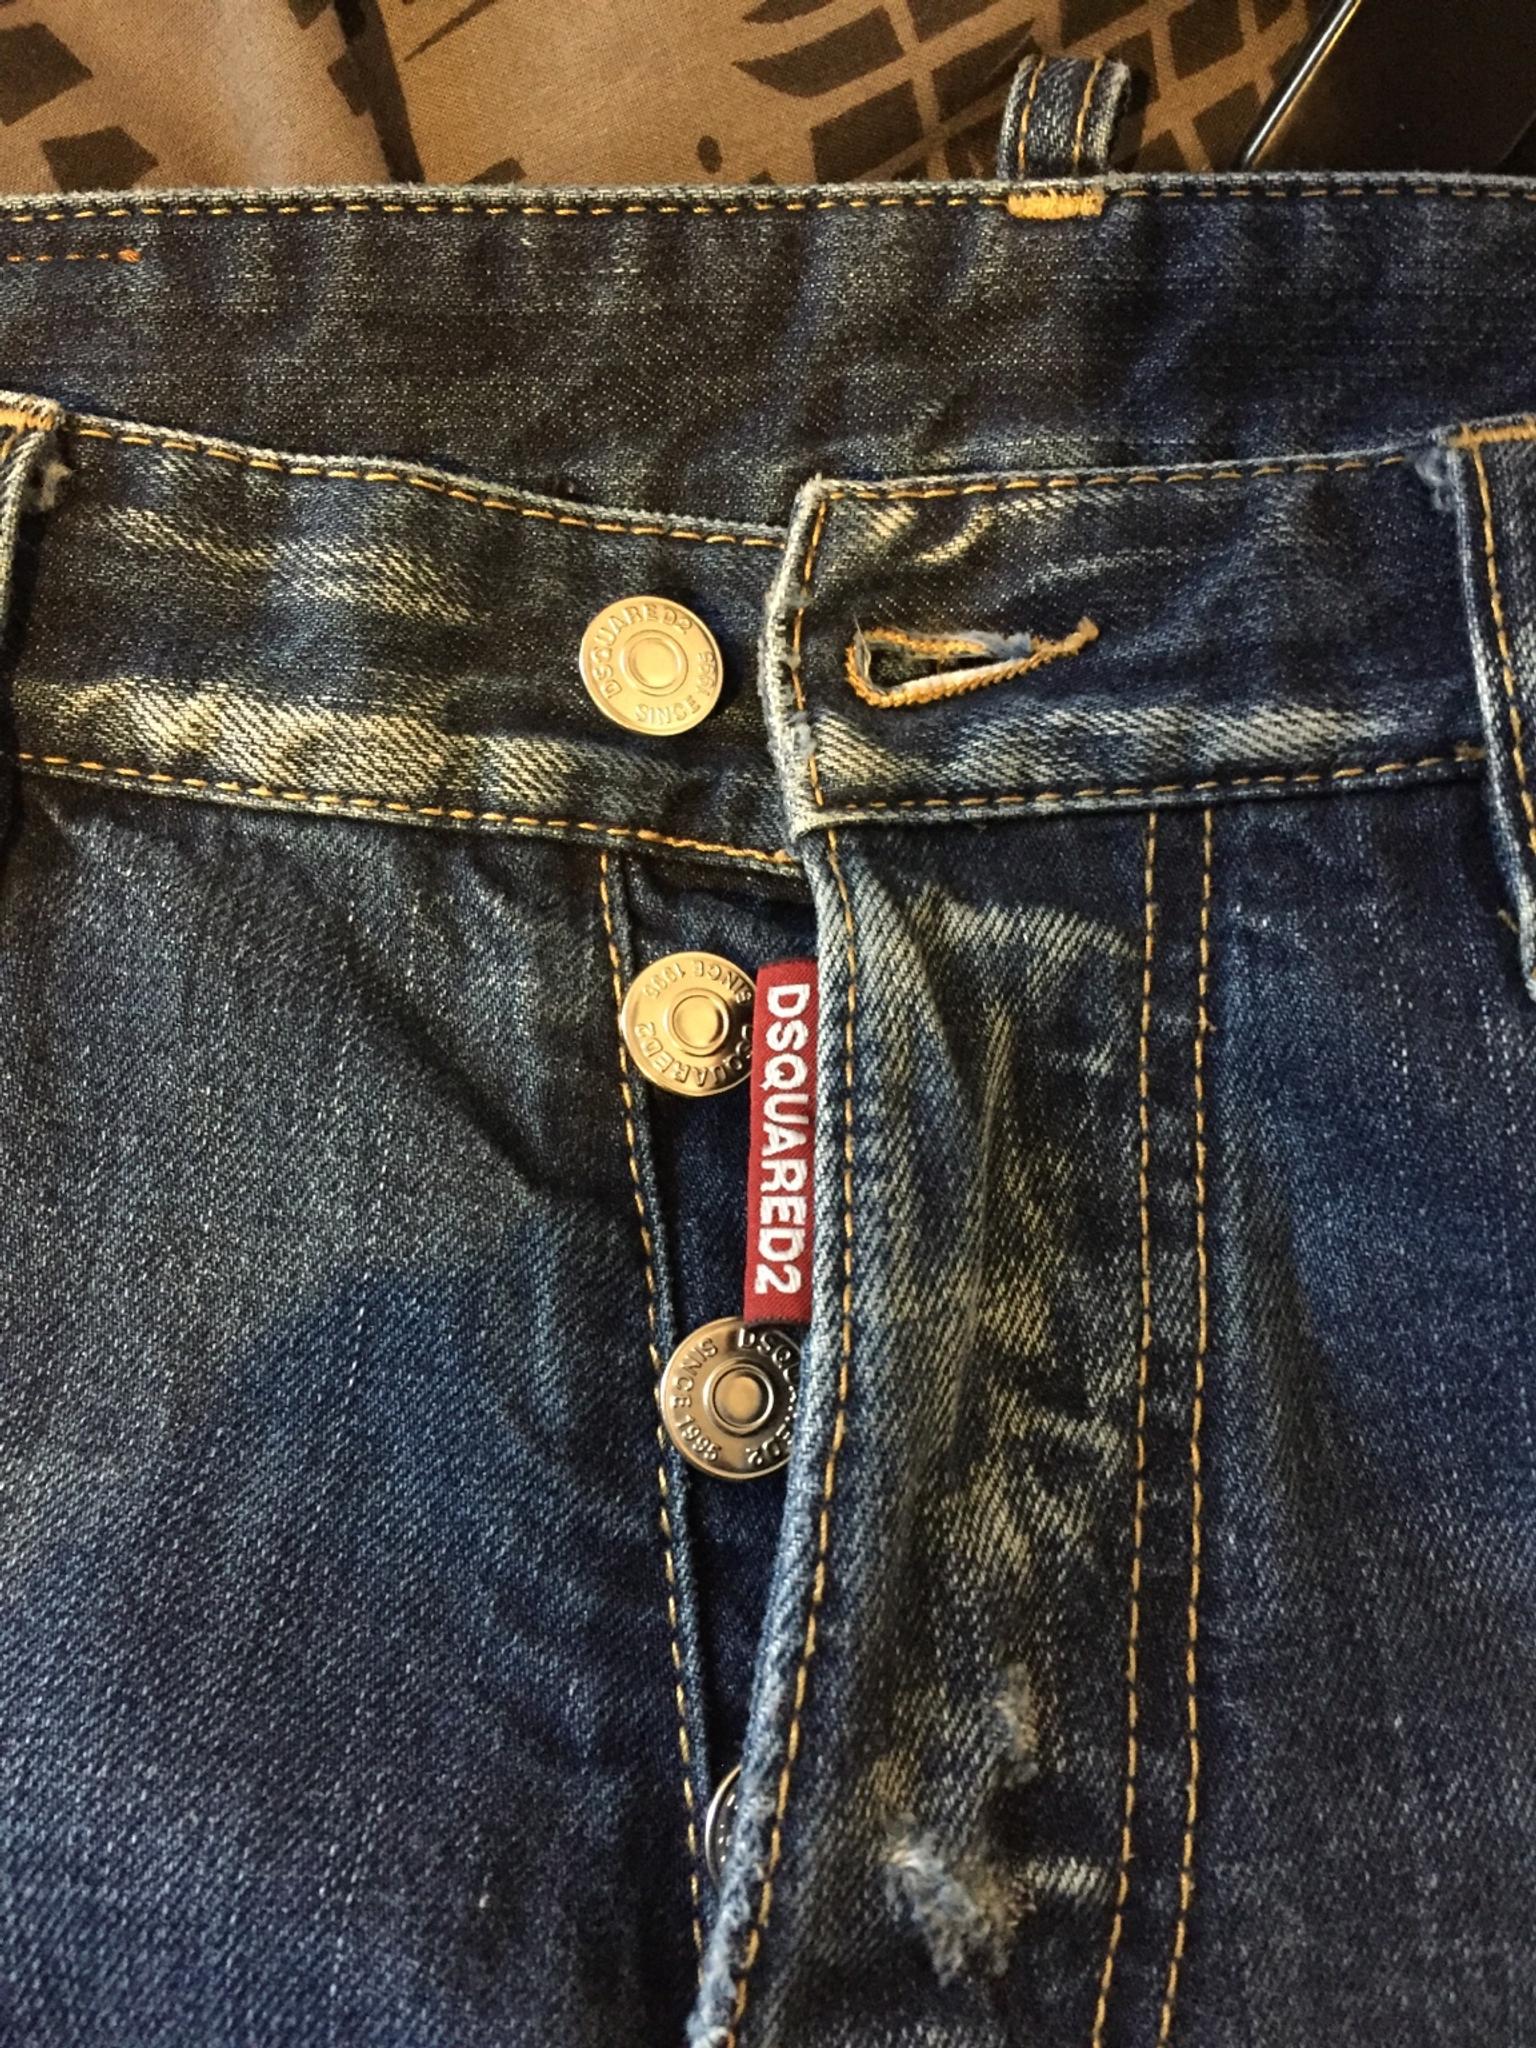 Dsquared2 Jeans in IG2 London for £50 